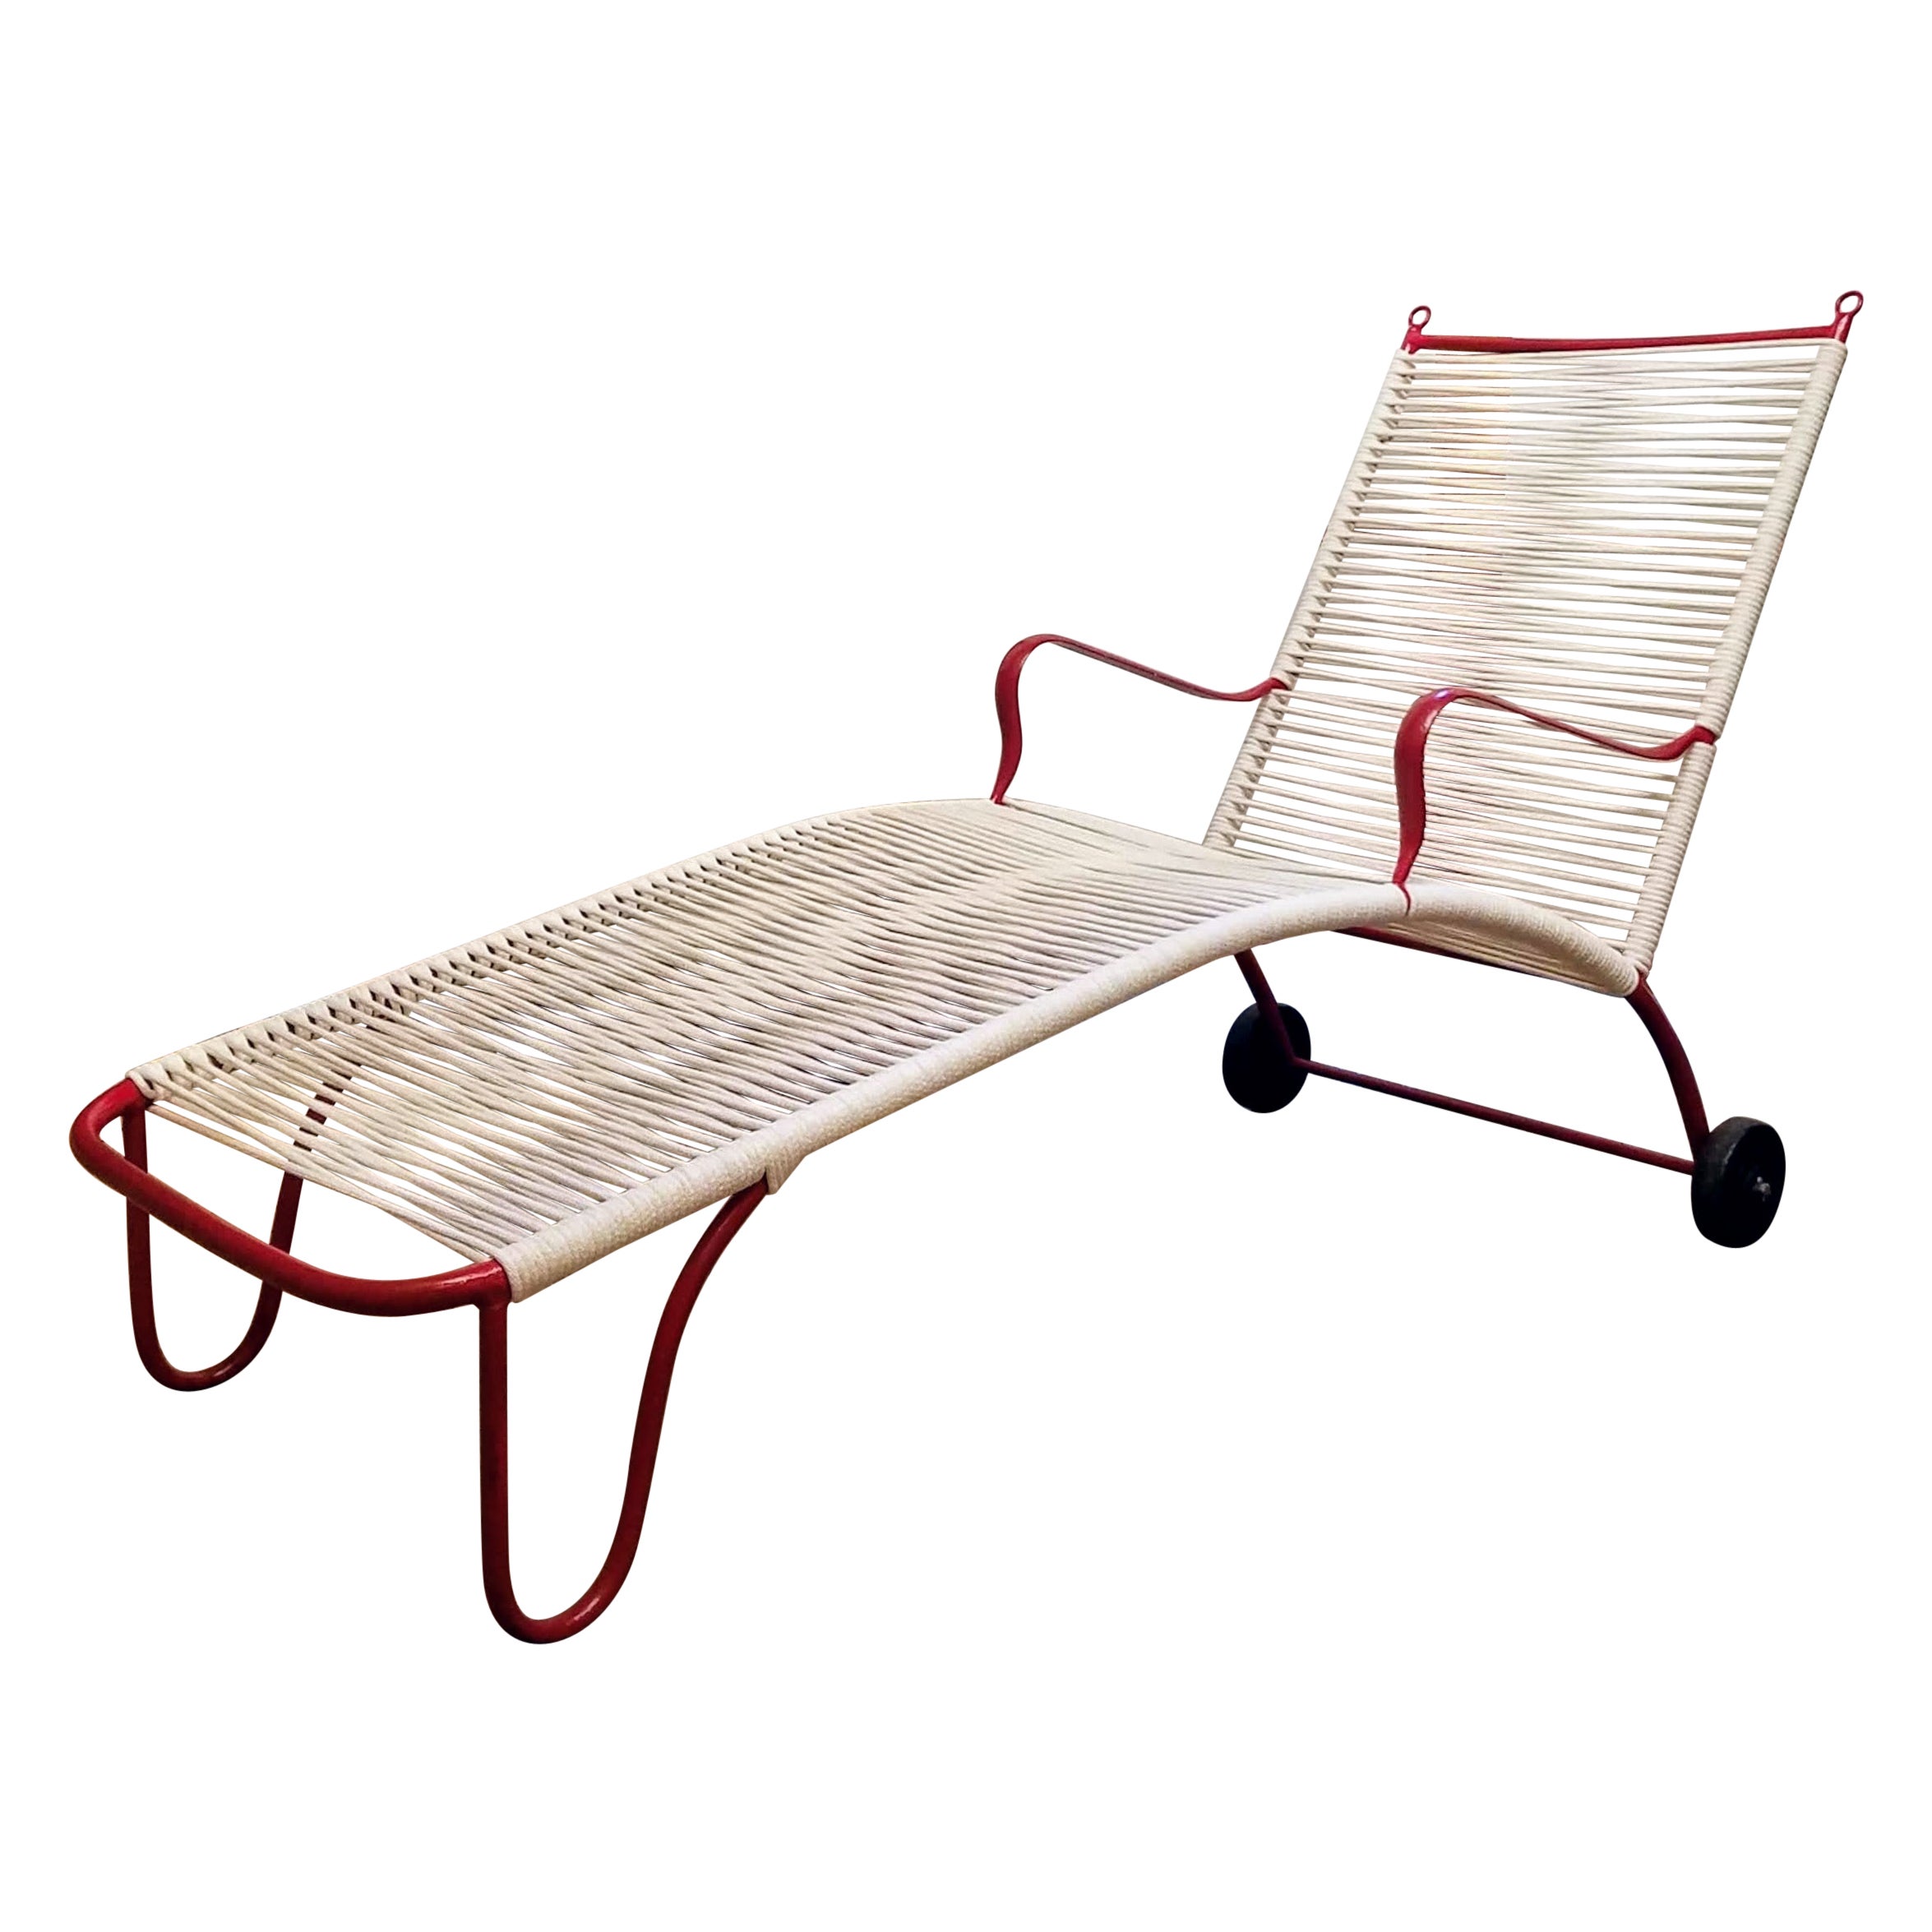 Robert Lewis Rolling Chaise Lounge Studio Crafted Santa Barbara, CA. 1930er Jahre